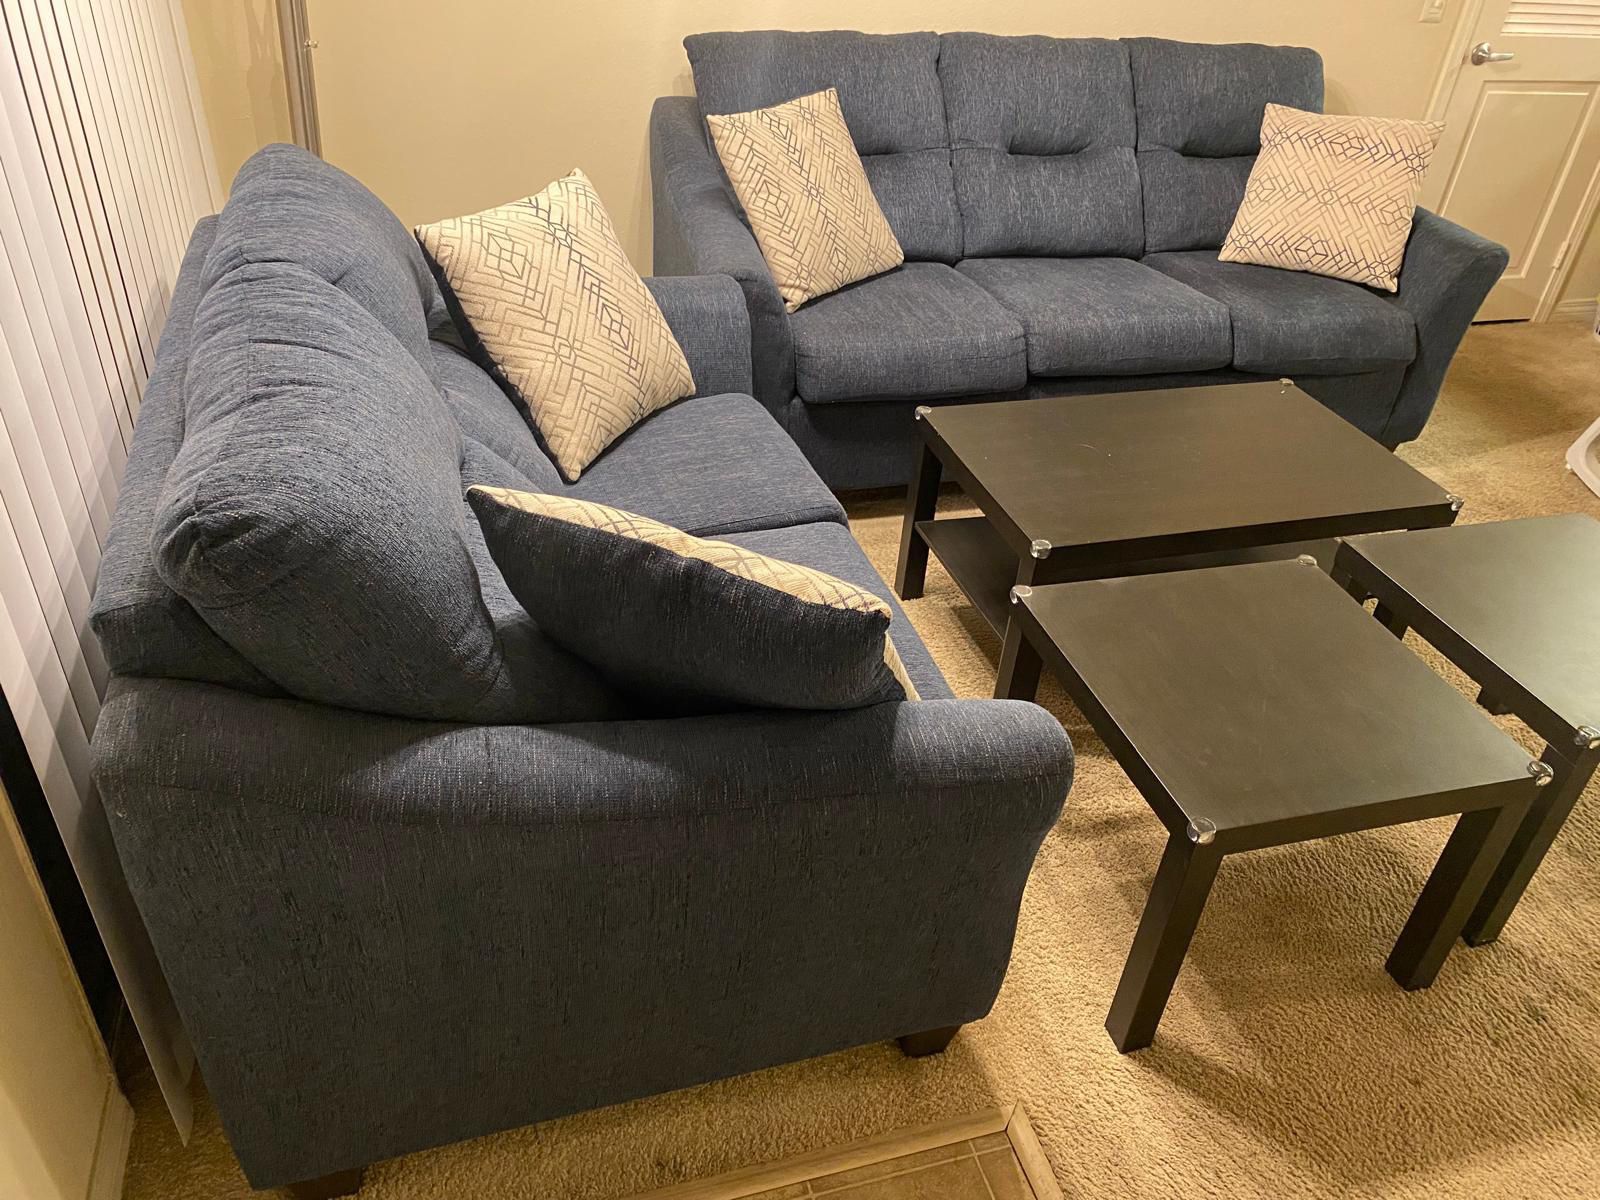 Sofa, Loveseat, Coffee table with Side Tables